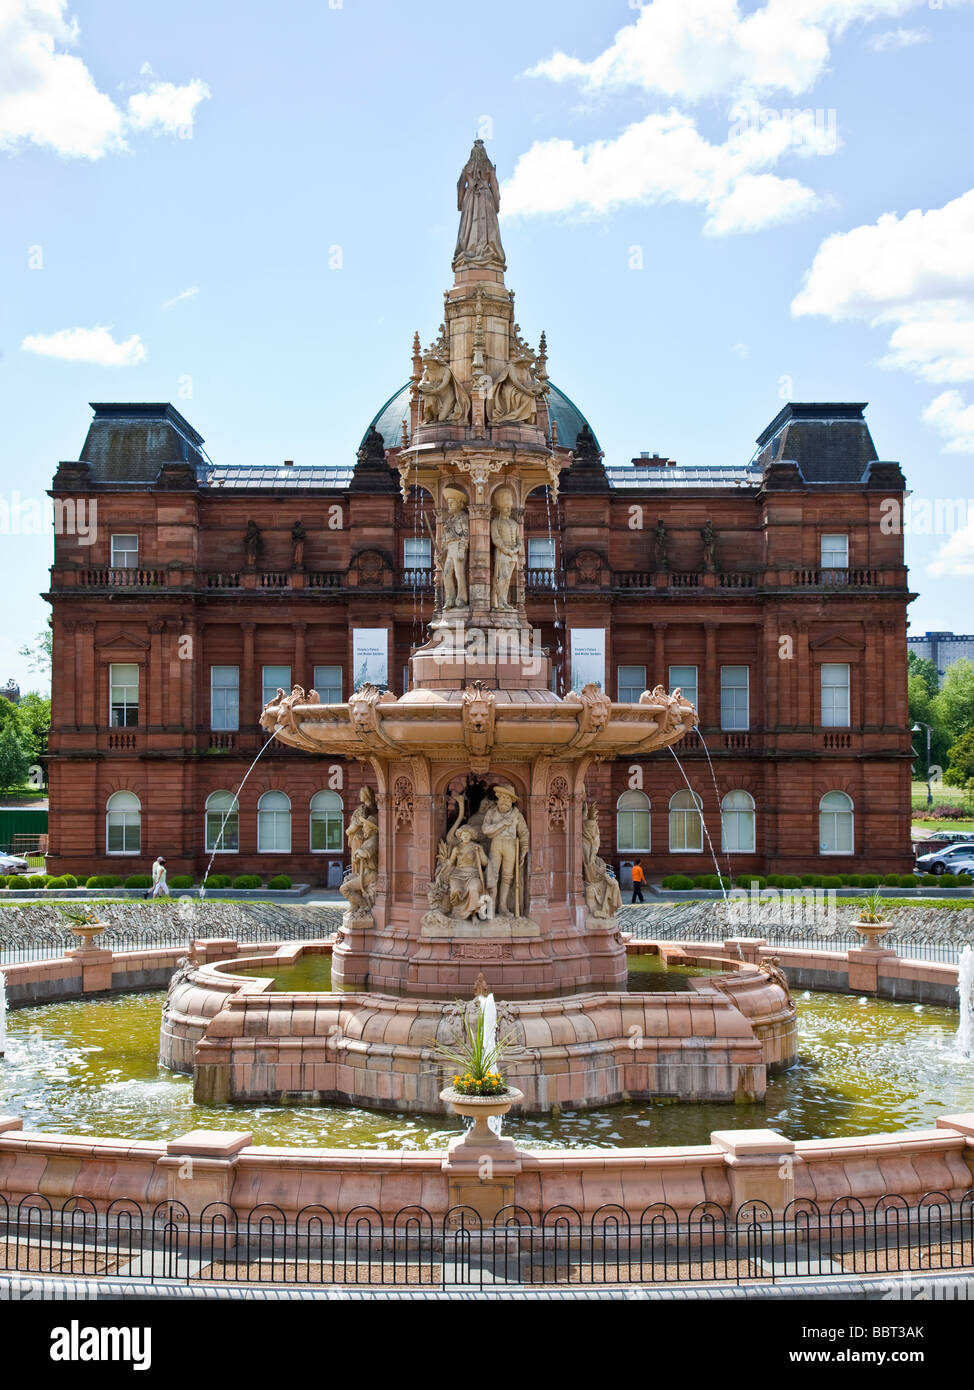 The Doulton Fountain, standing in Glasgow Green, in front of the Peoples' Palace. Stock Photo